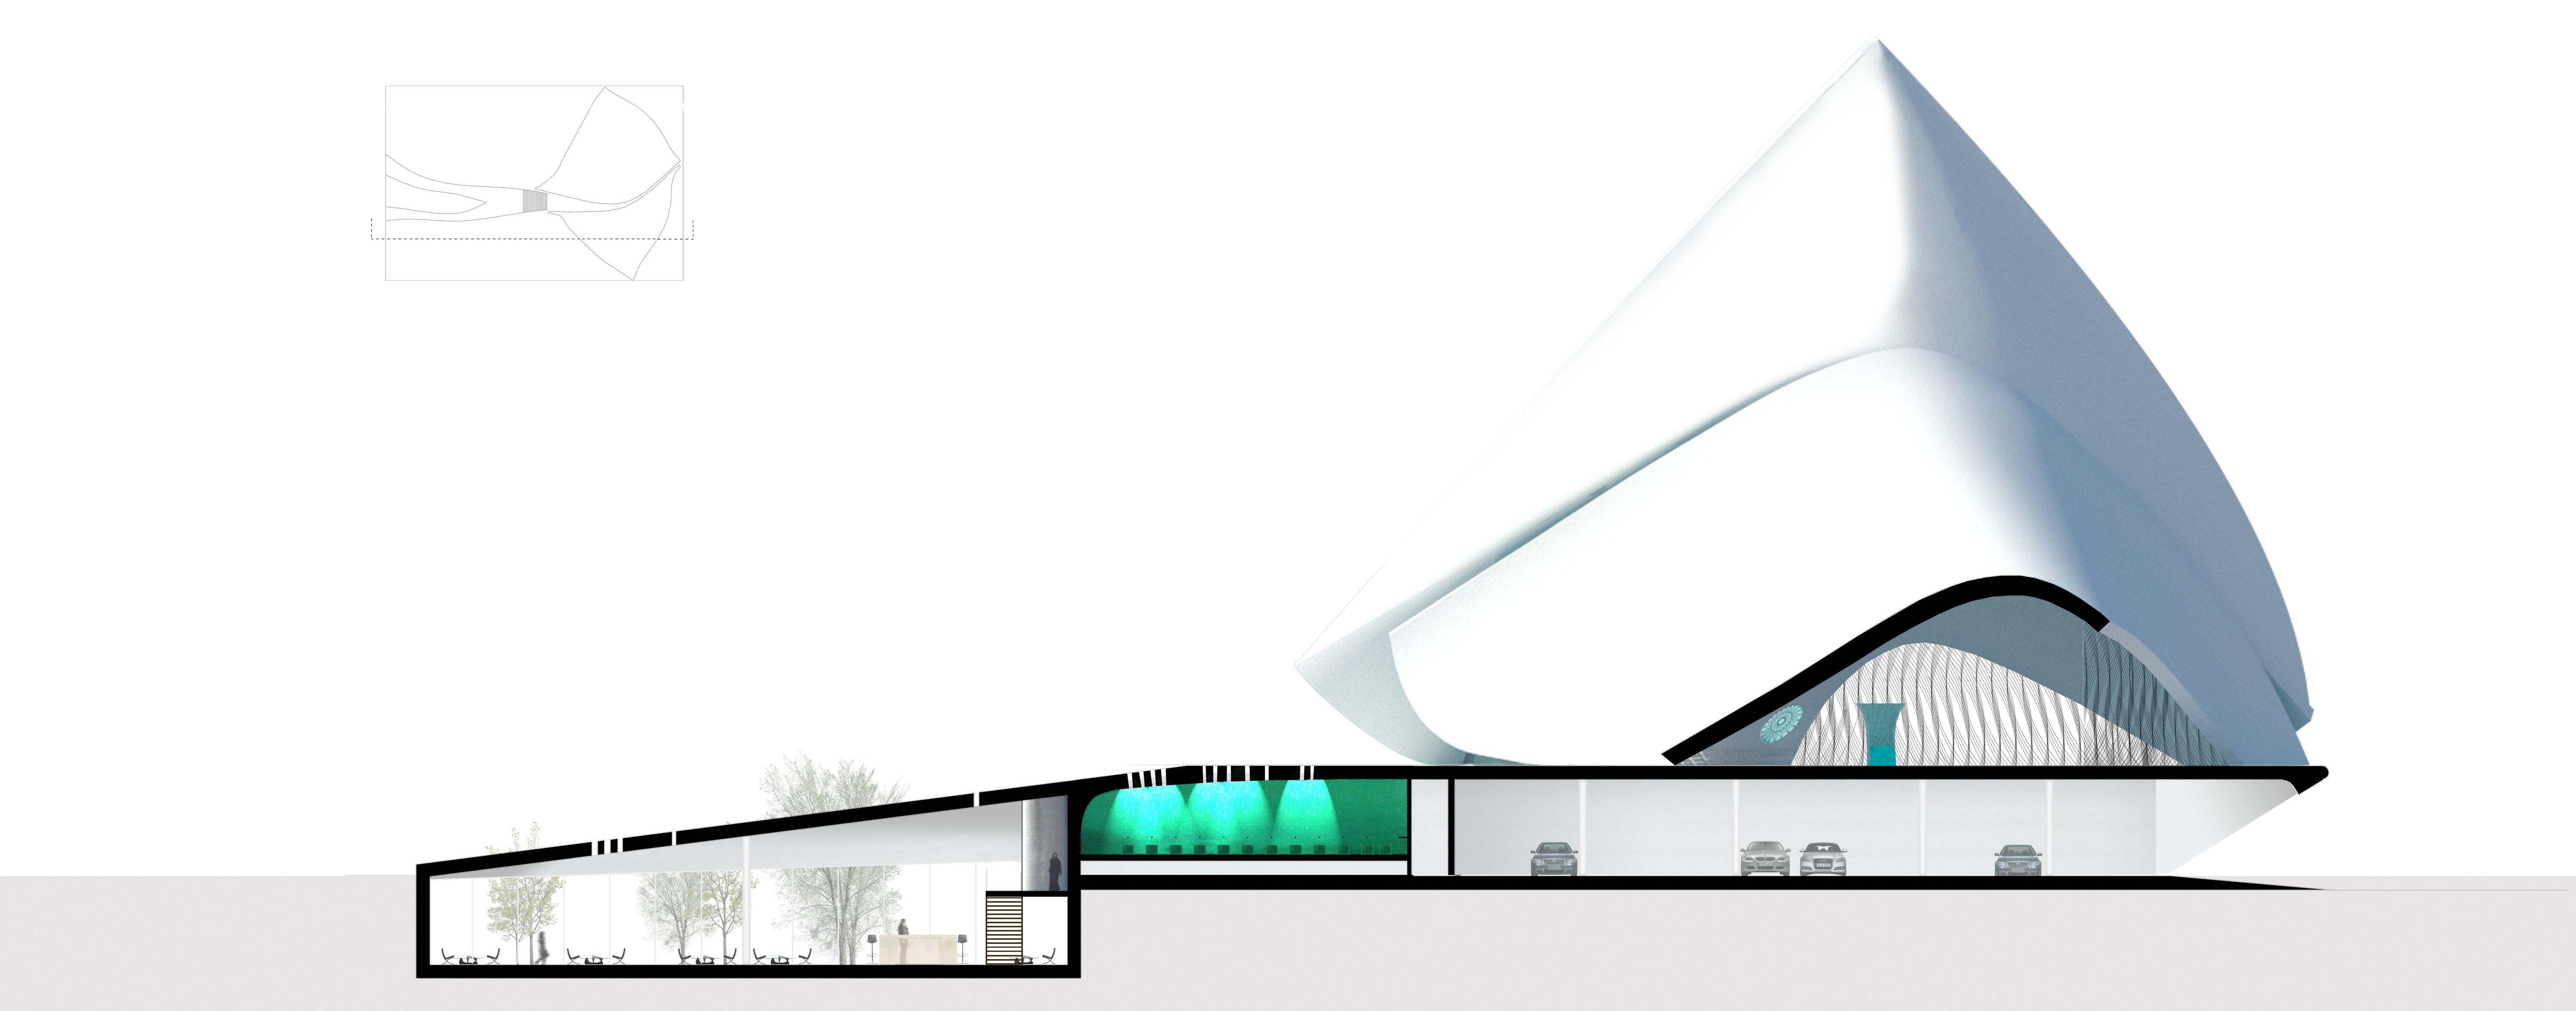 a contemporary mosque design with underground parking and ablutions